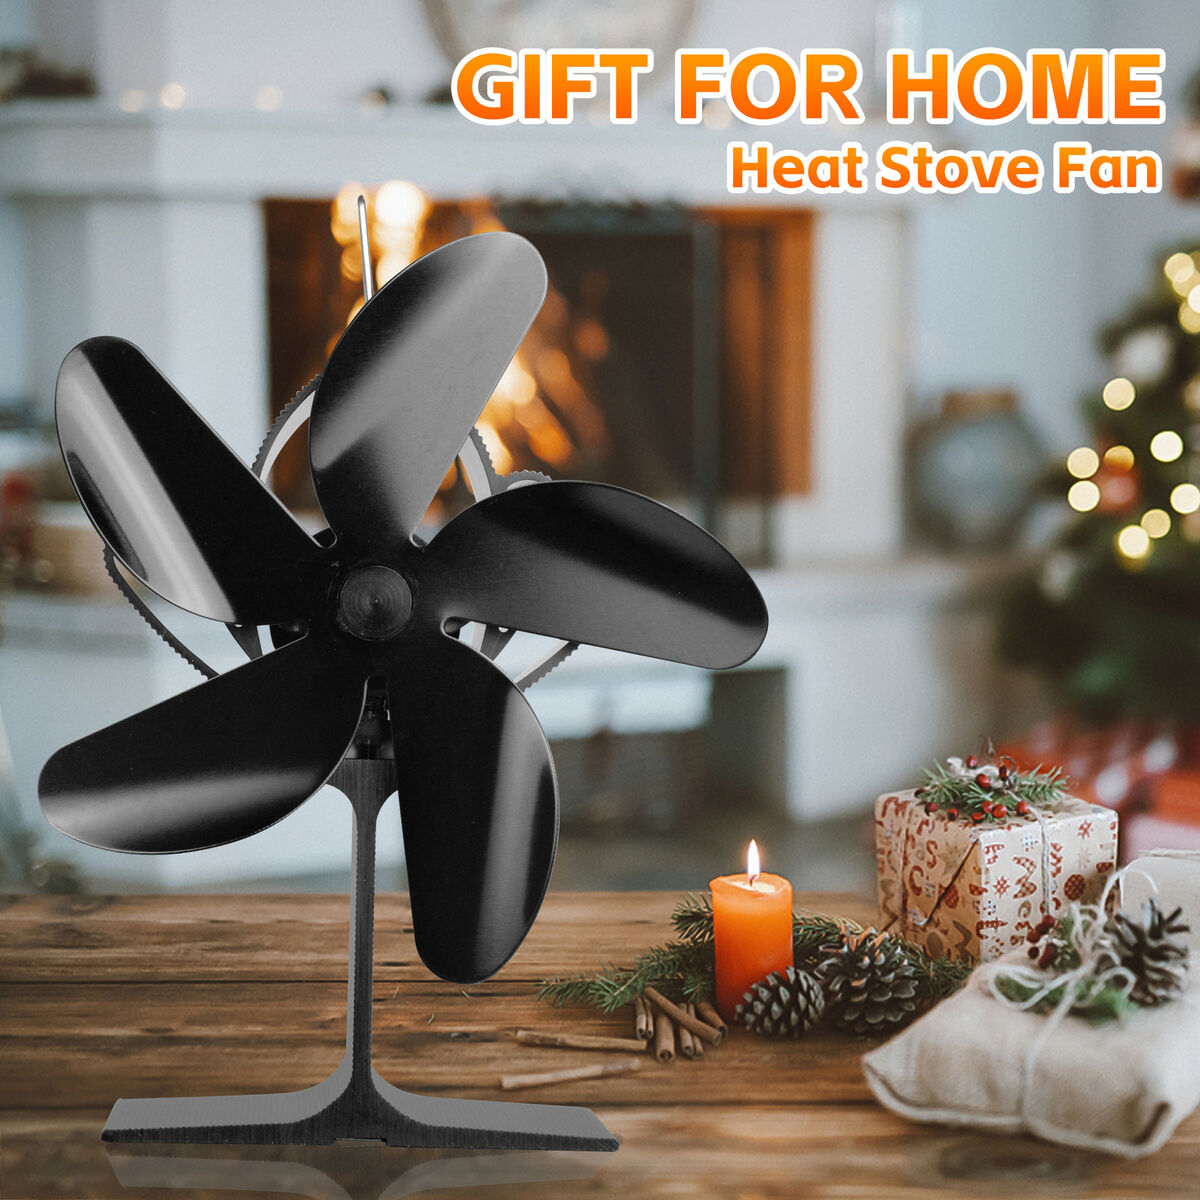 Wood Stove Fan 5-Blade Fireplace Fan for Wood Burning Stove, Heat